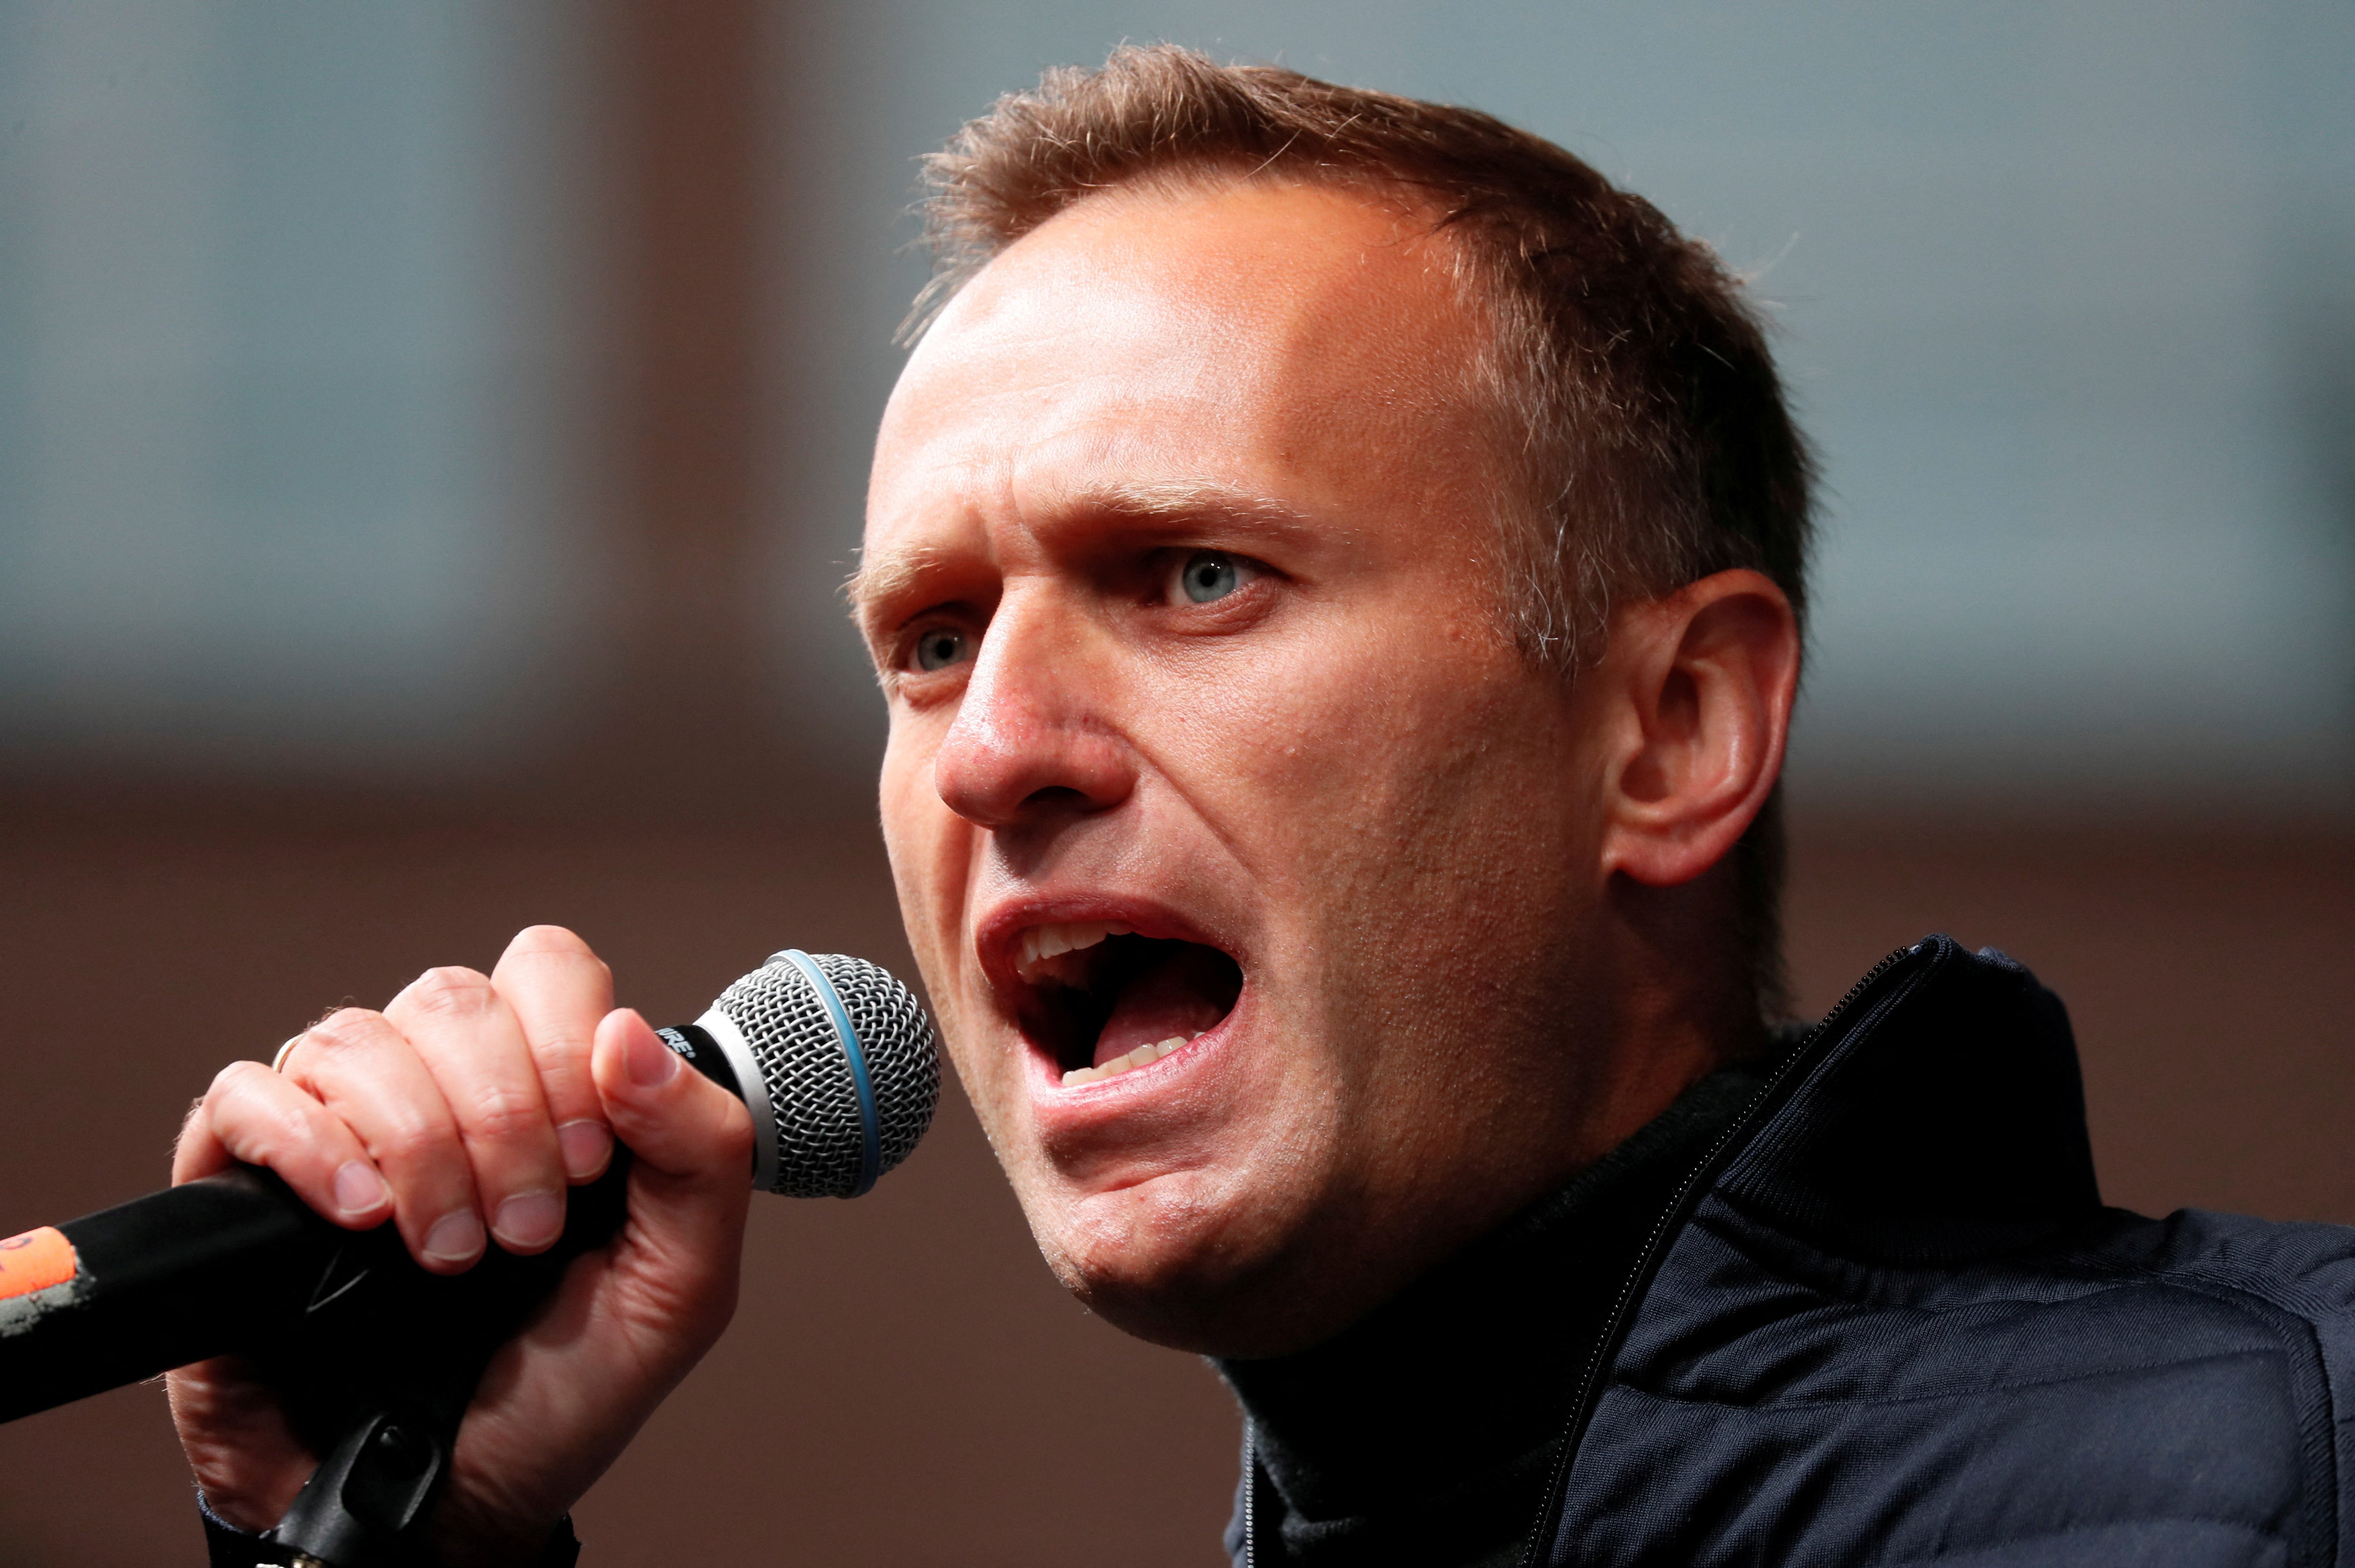 Alexei Navalny’s family and friends had urged him not to go back to Russia, but he was determined to continue his fight